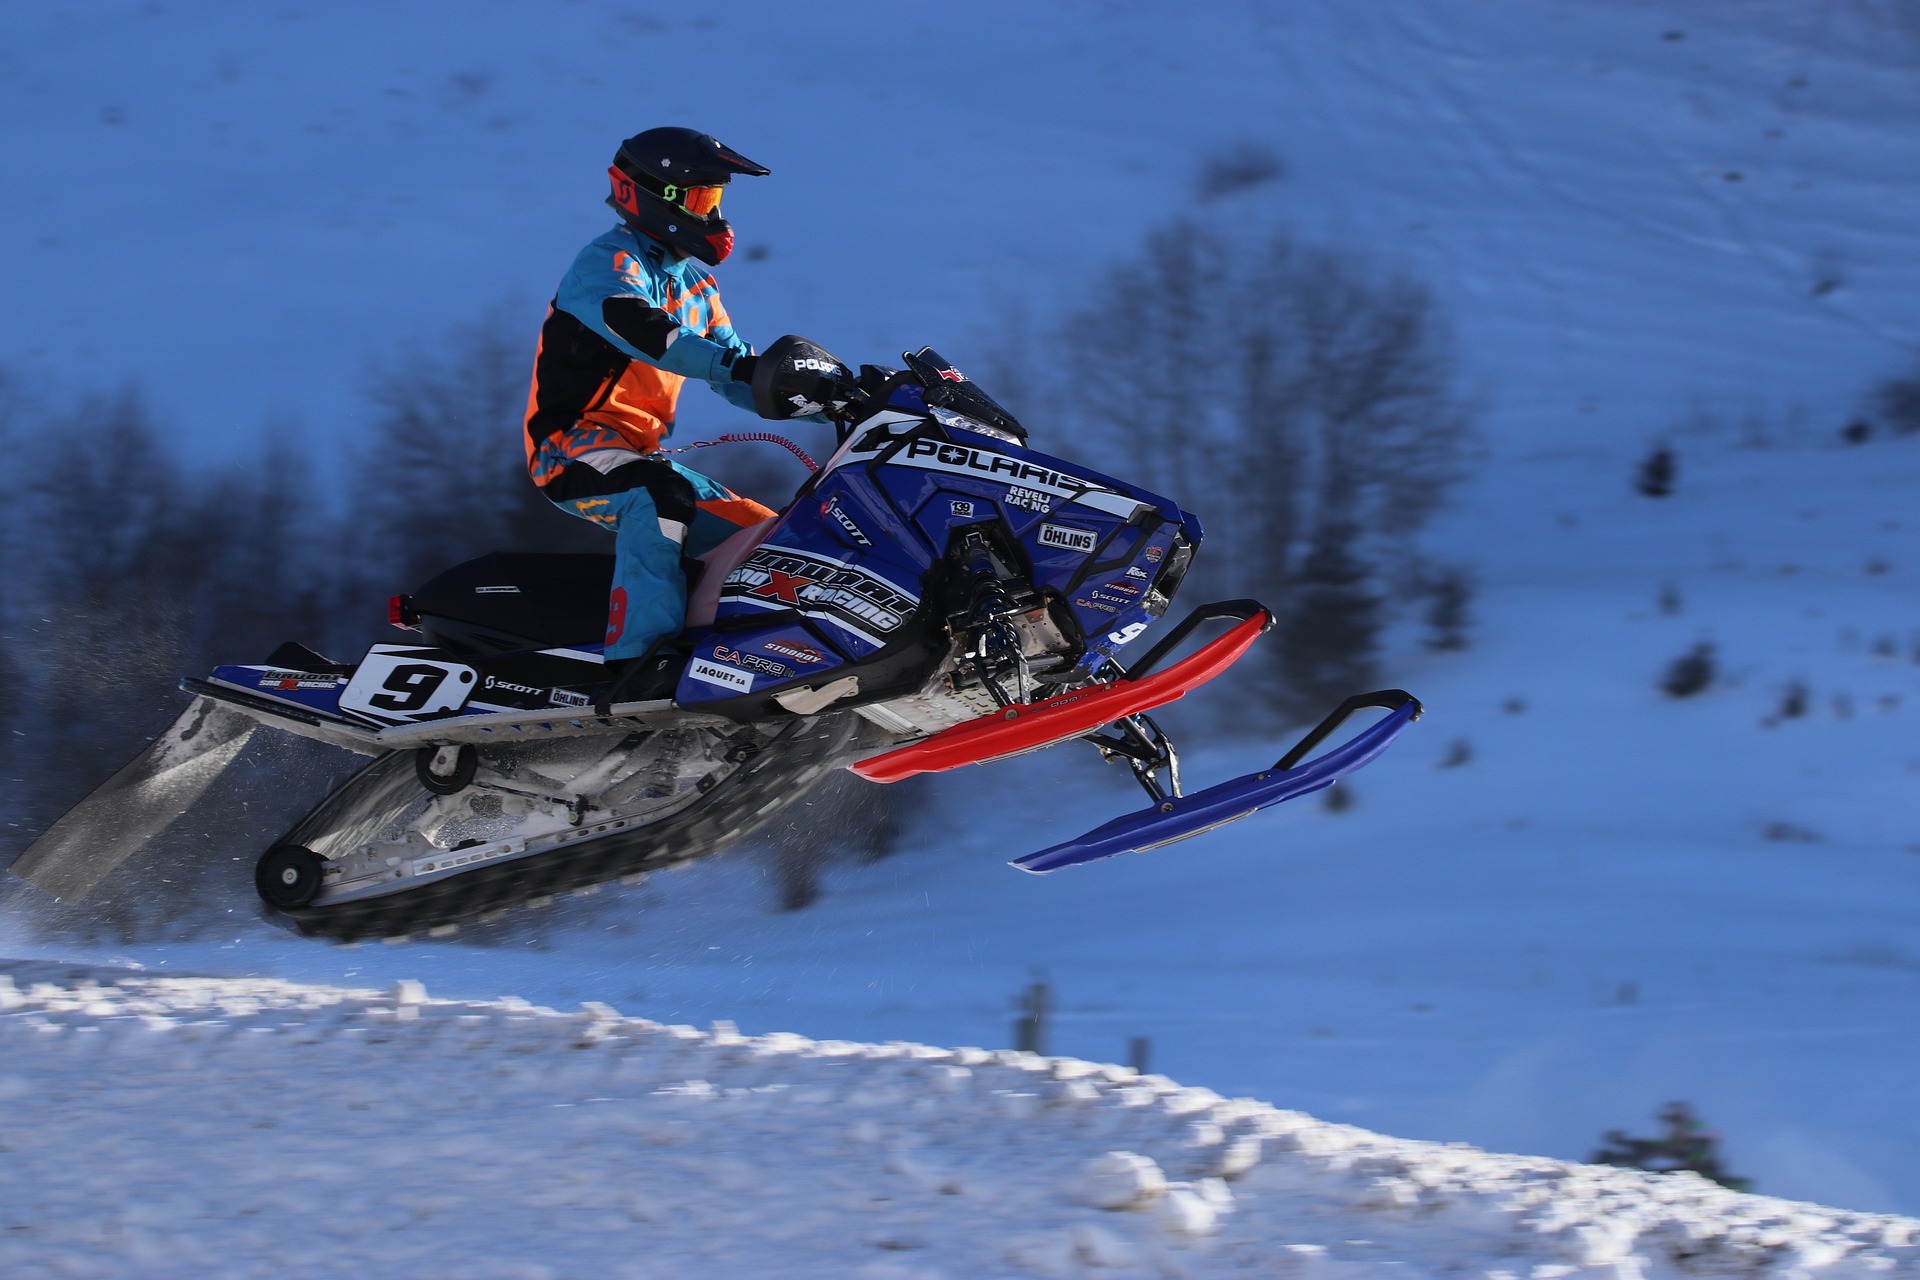 13 Facts About Snowmobile Racing - Facts.net